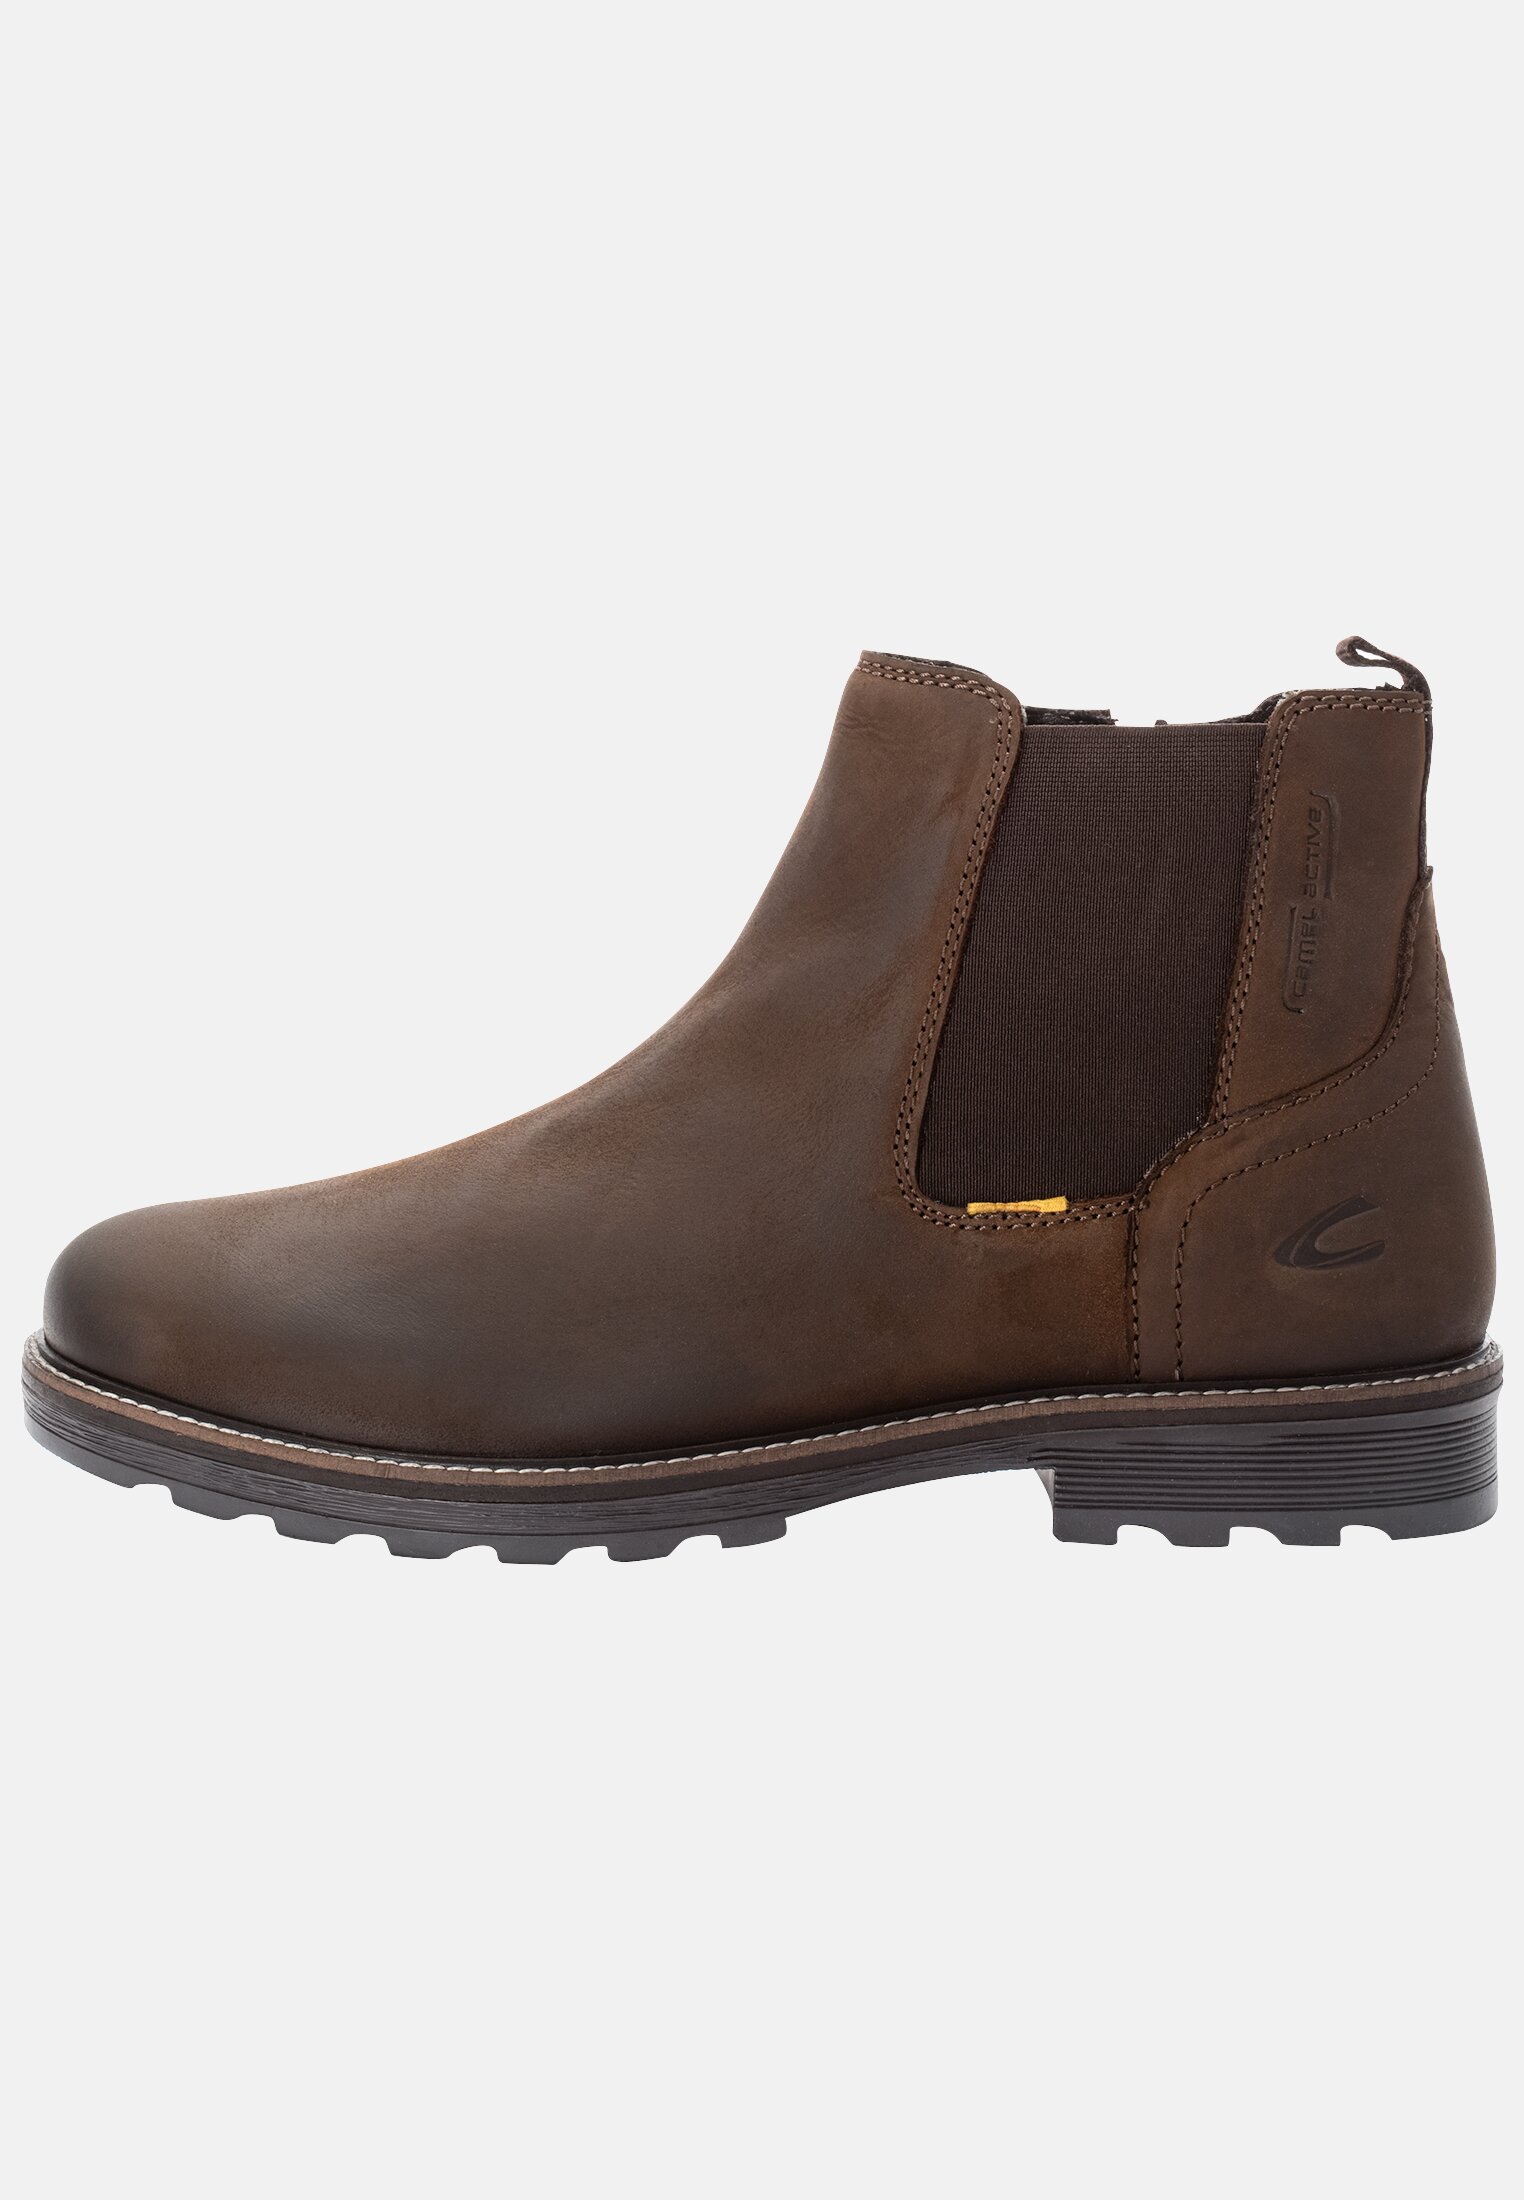 Camel Active Chelsea boot made from genuine leather